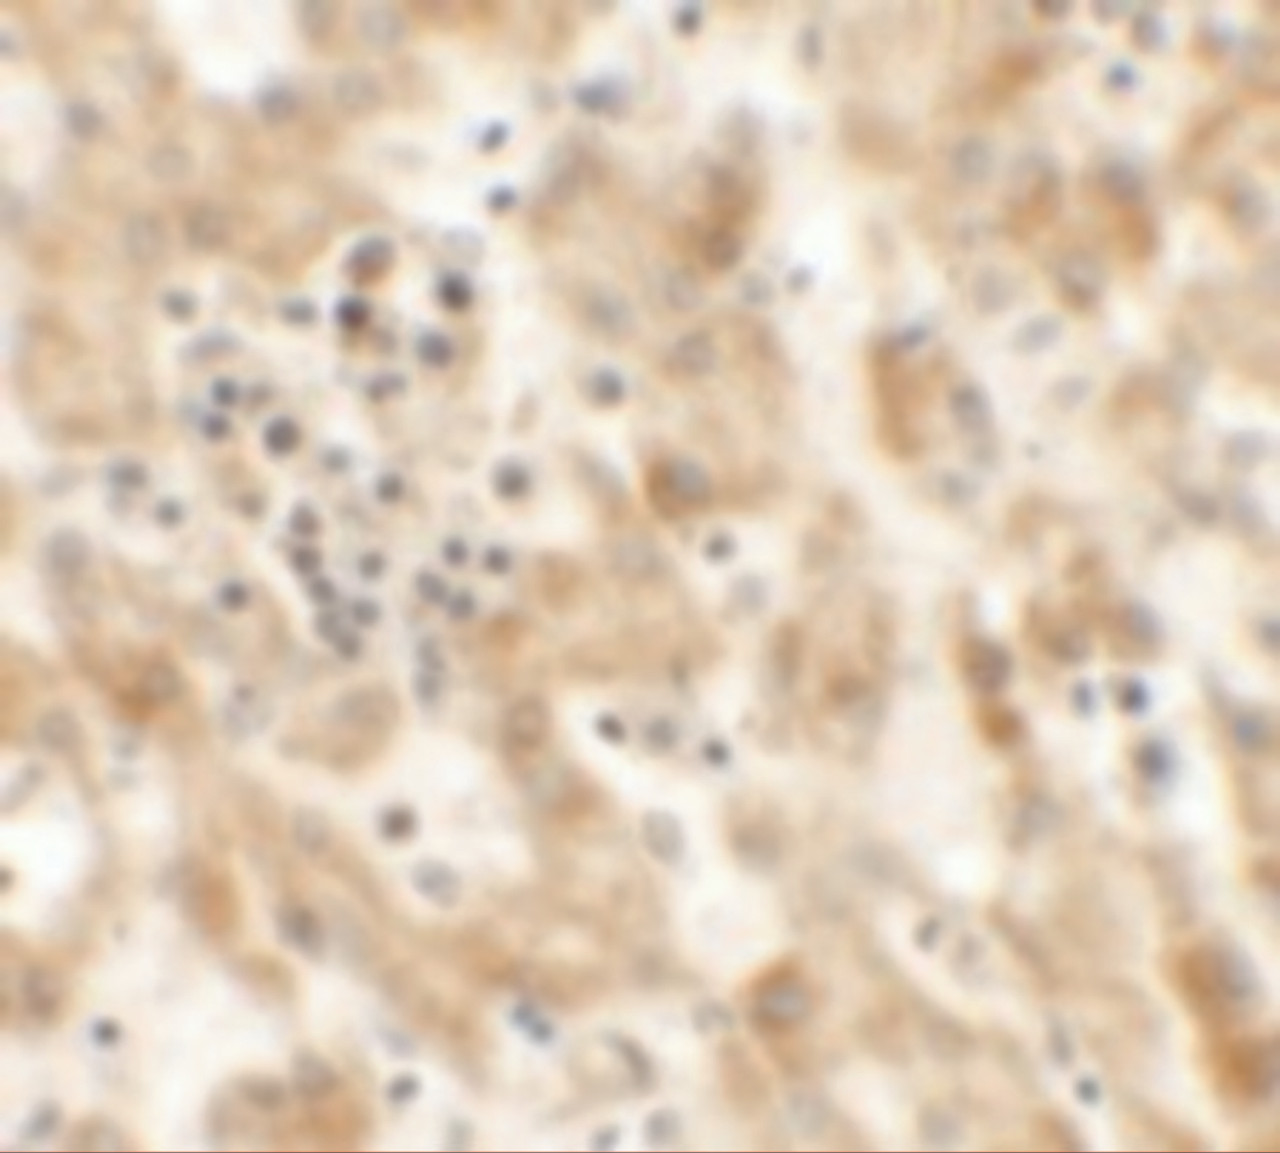 Immunohistochemistry of NKX2-8 in human liver tissue with NKX2-8 antibody at 2.5 ug/mL.